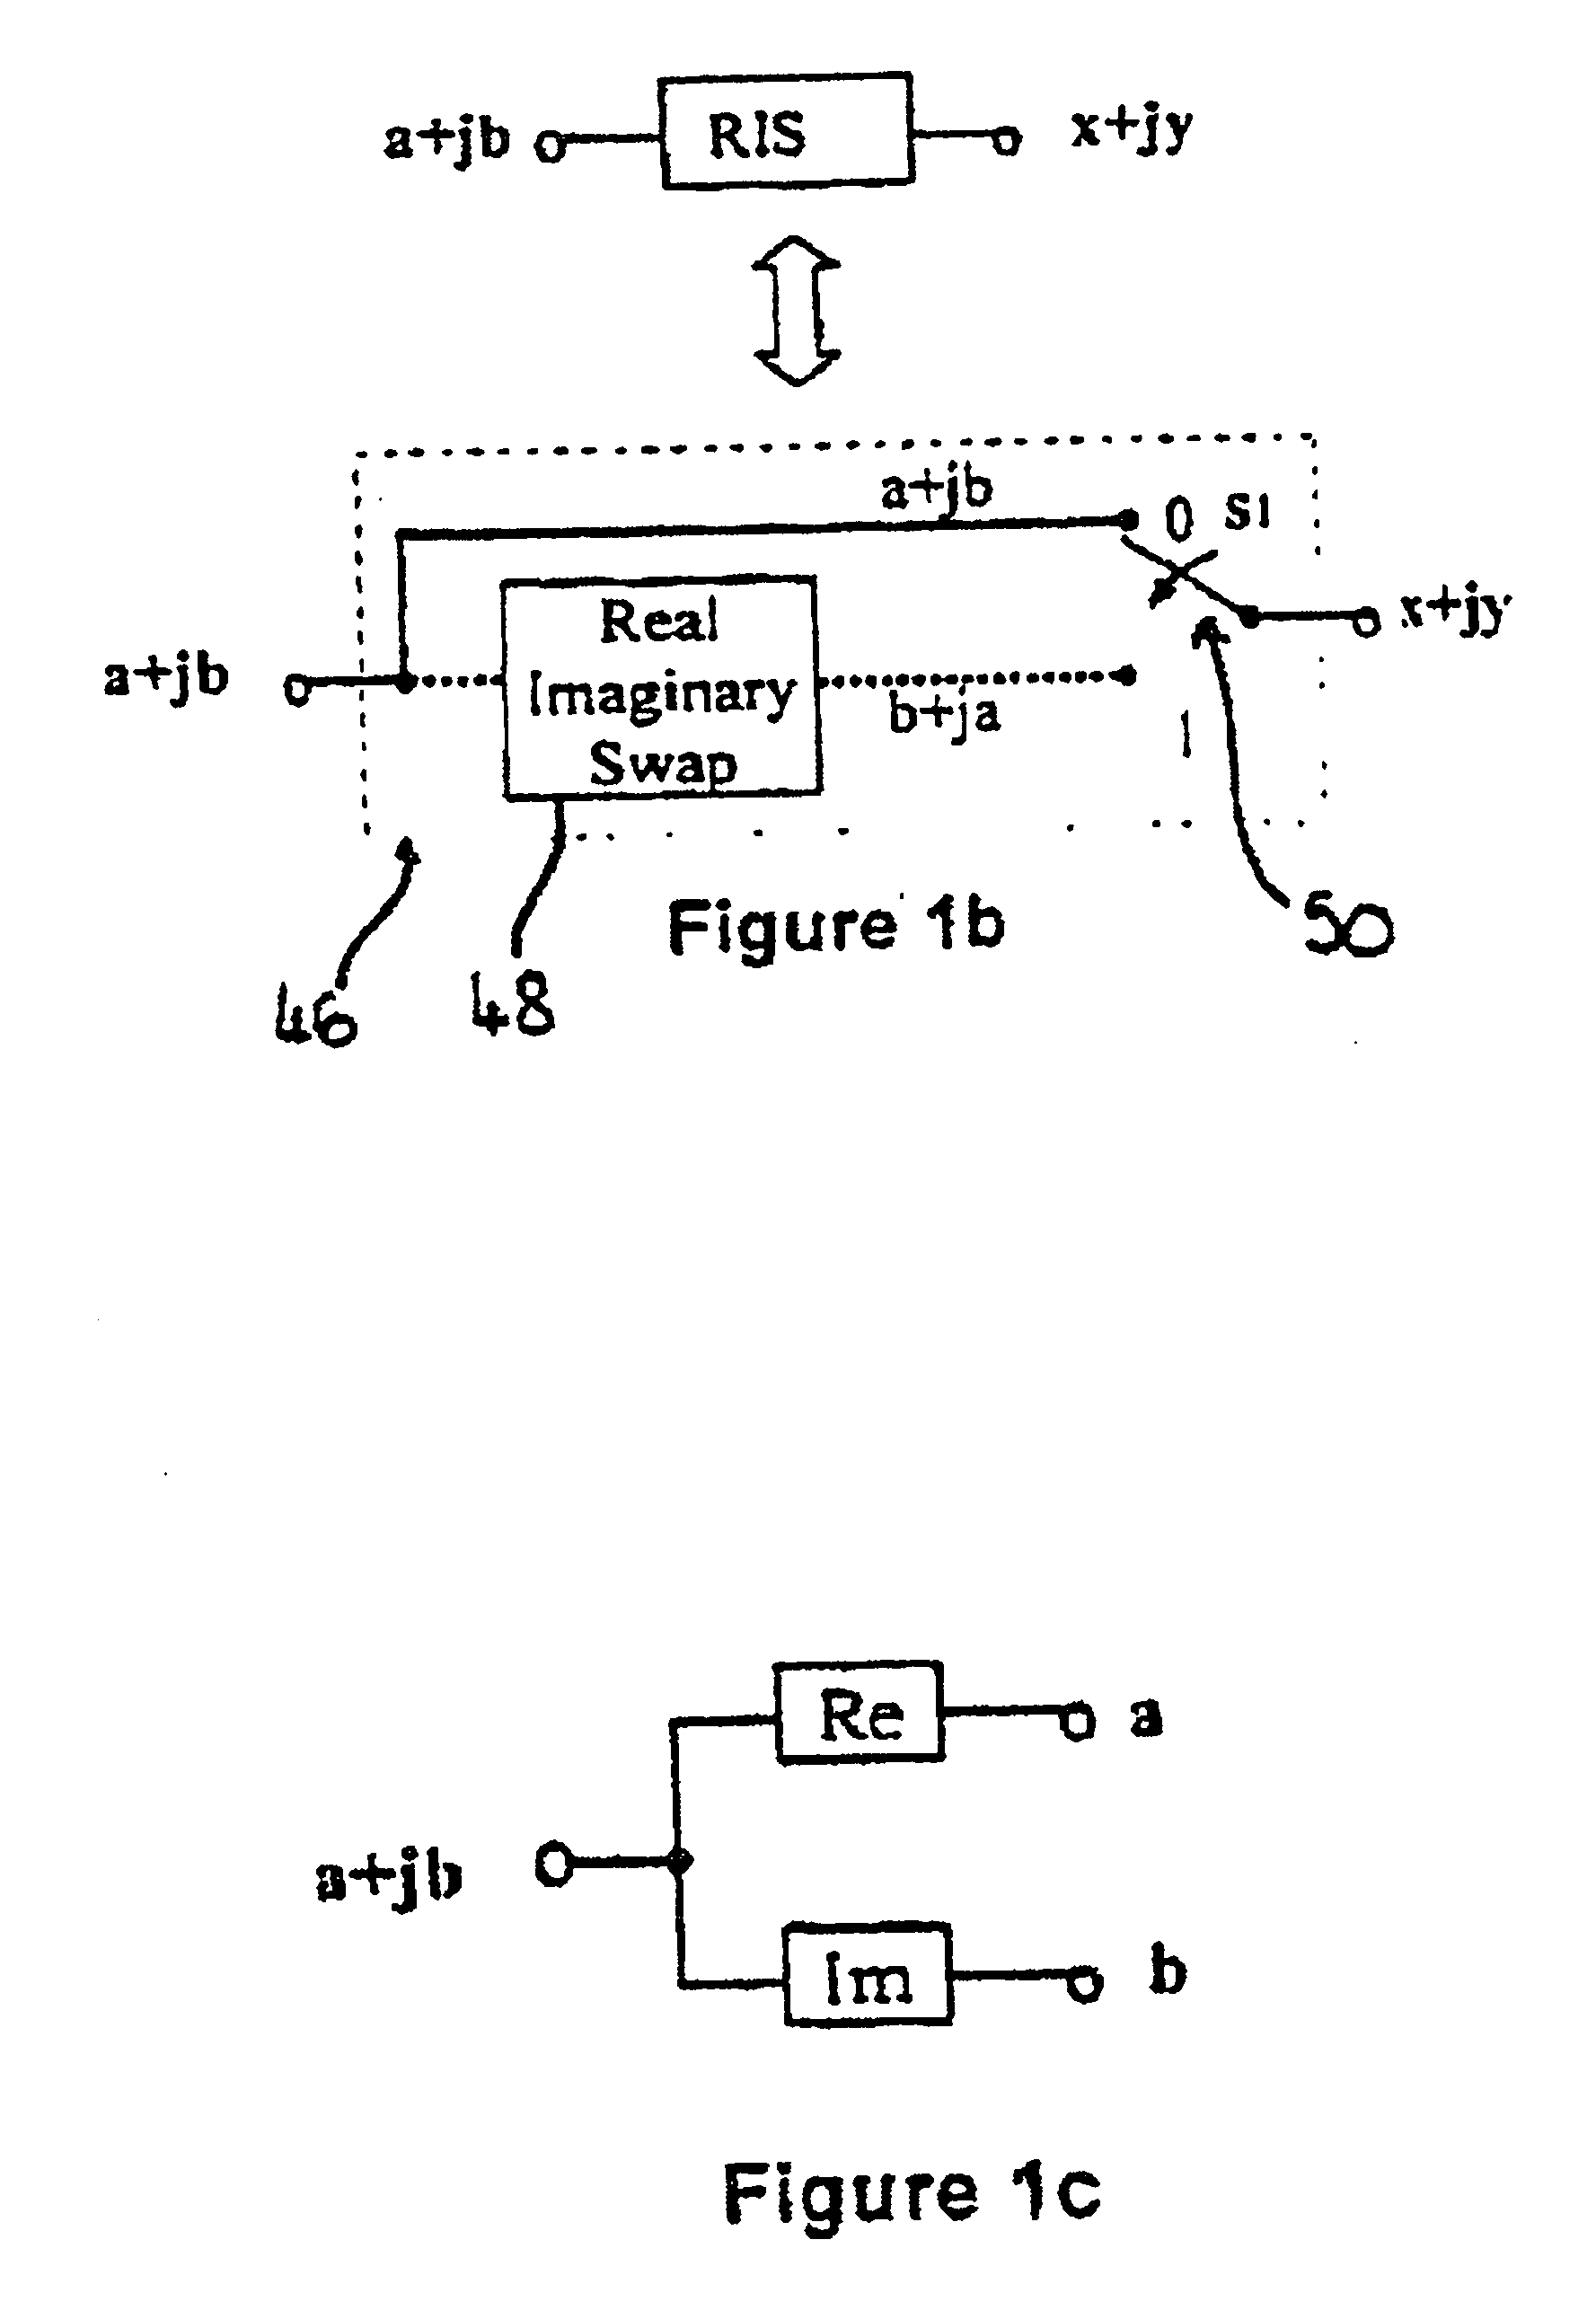 Processor and method for performing a fast fourier transform and/or an inverse fast fourier transform of a complex input signal